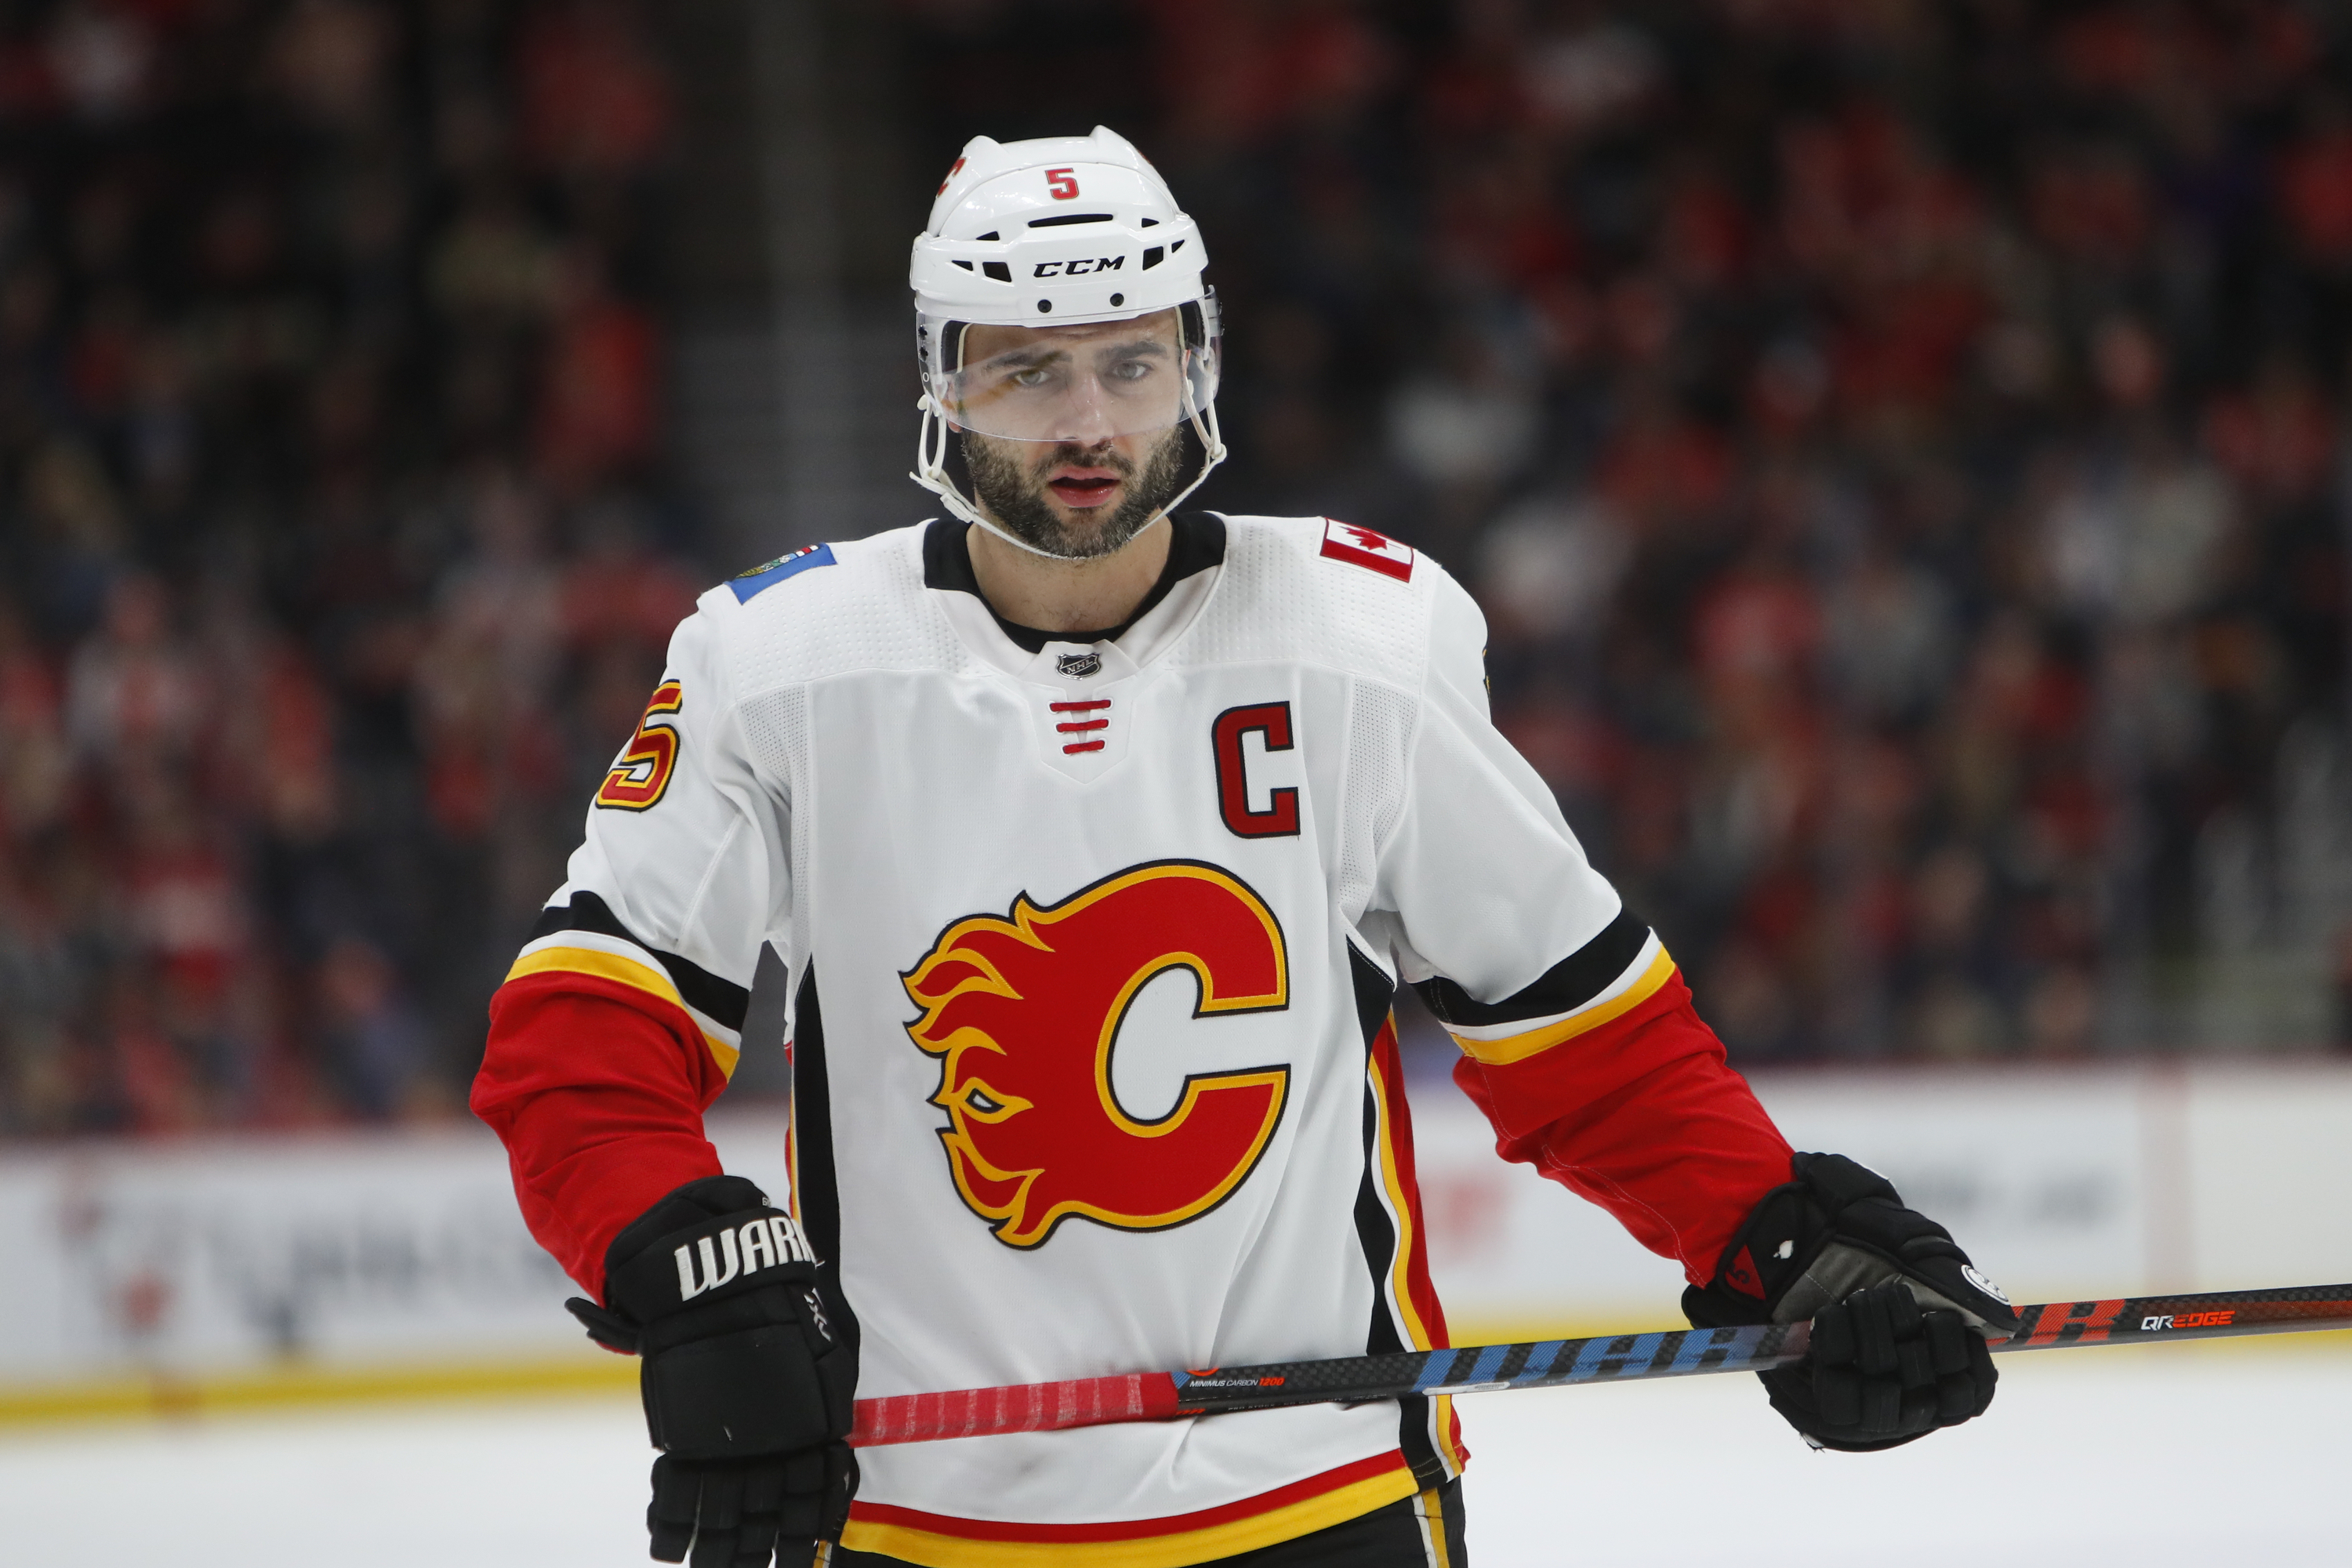 Calgary Flames - THAT'S OUR CAPTAIN! Mark Giordano is